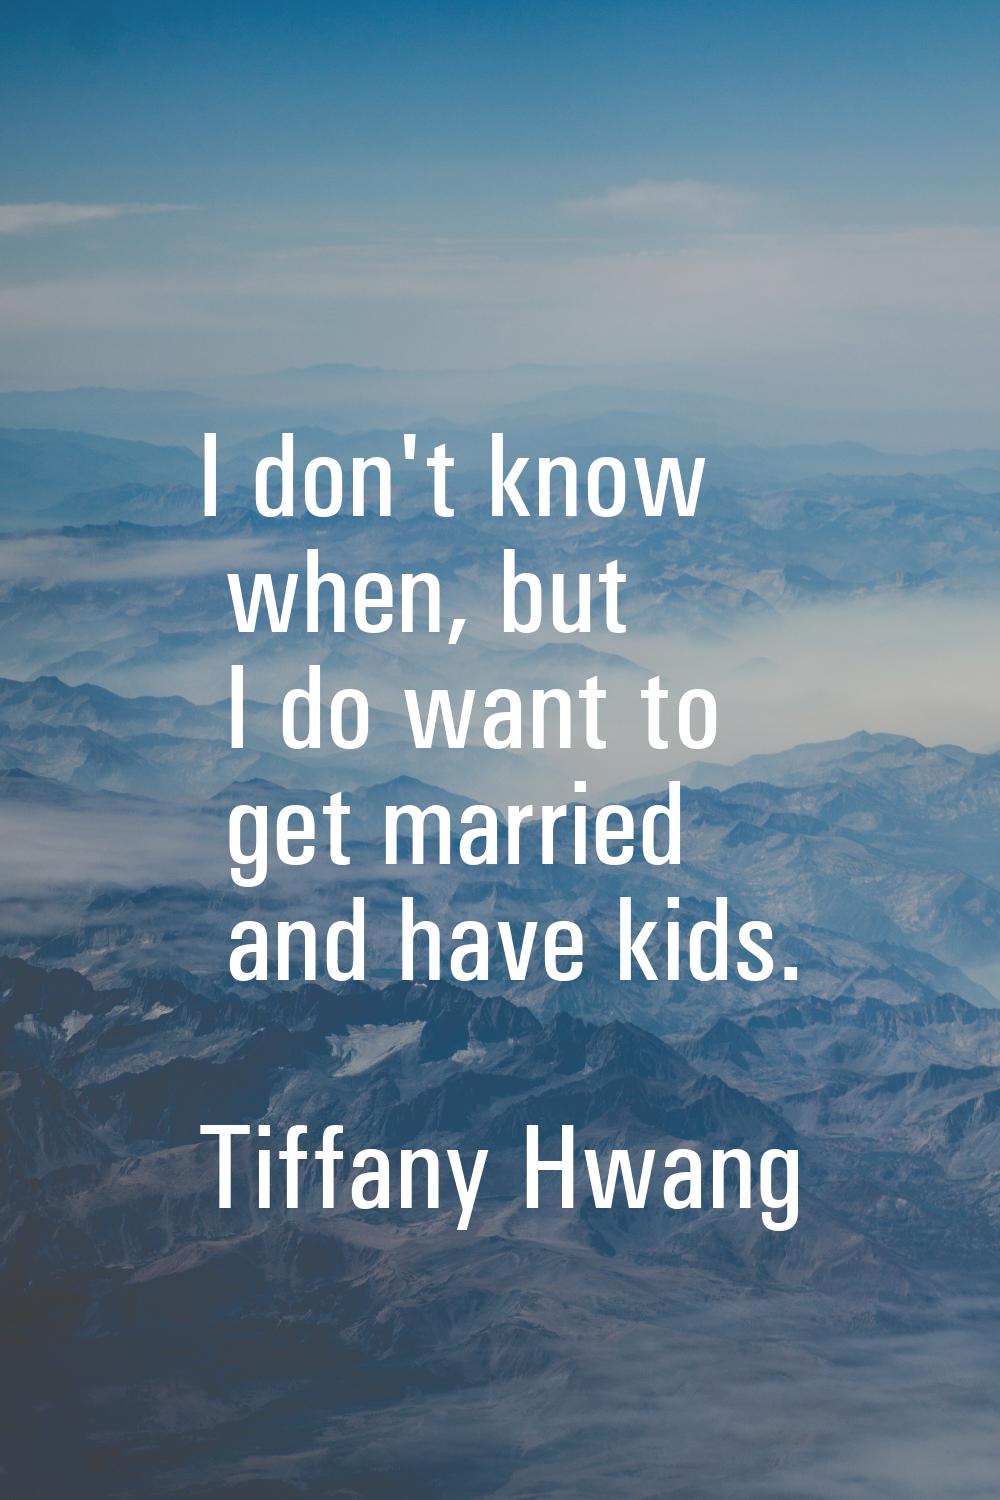 I don't know when, but I do want to get married and have kids.